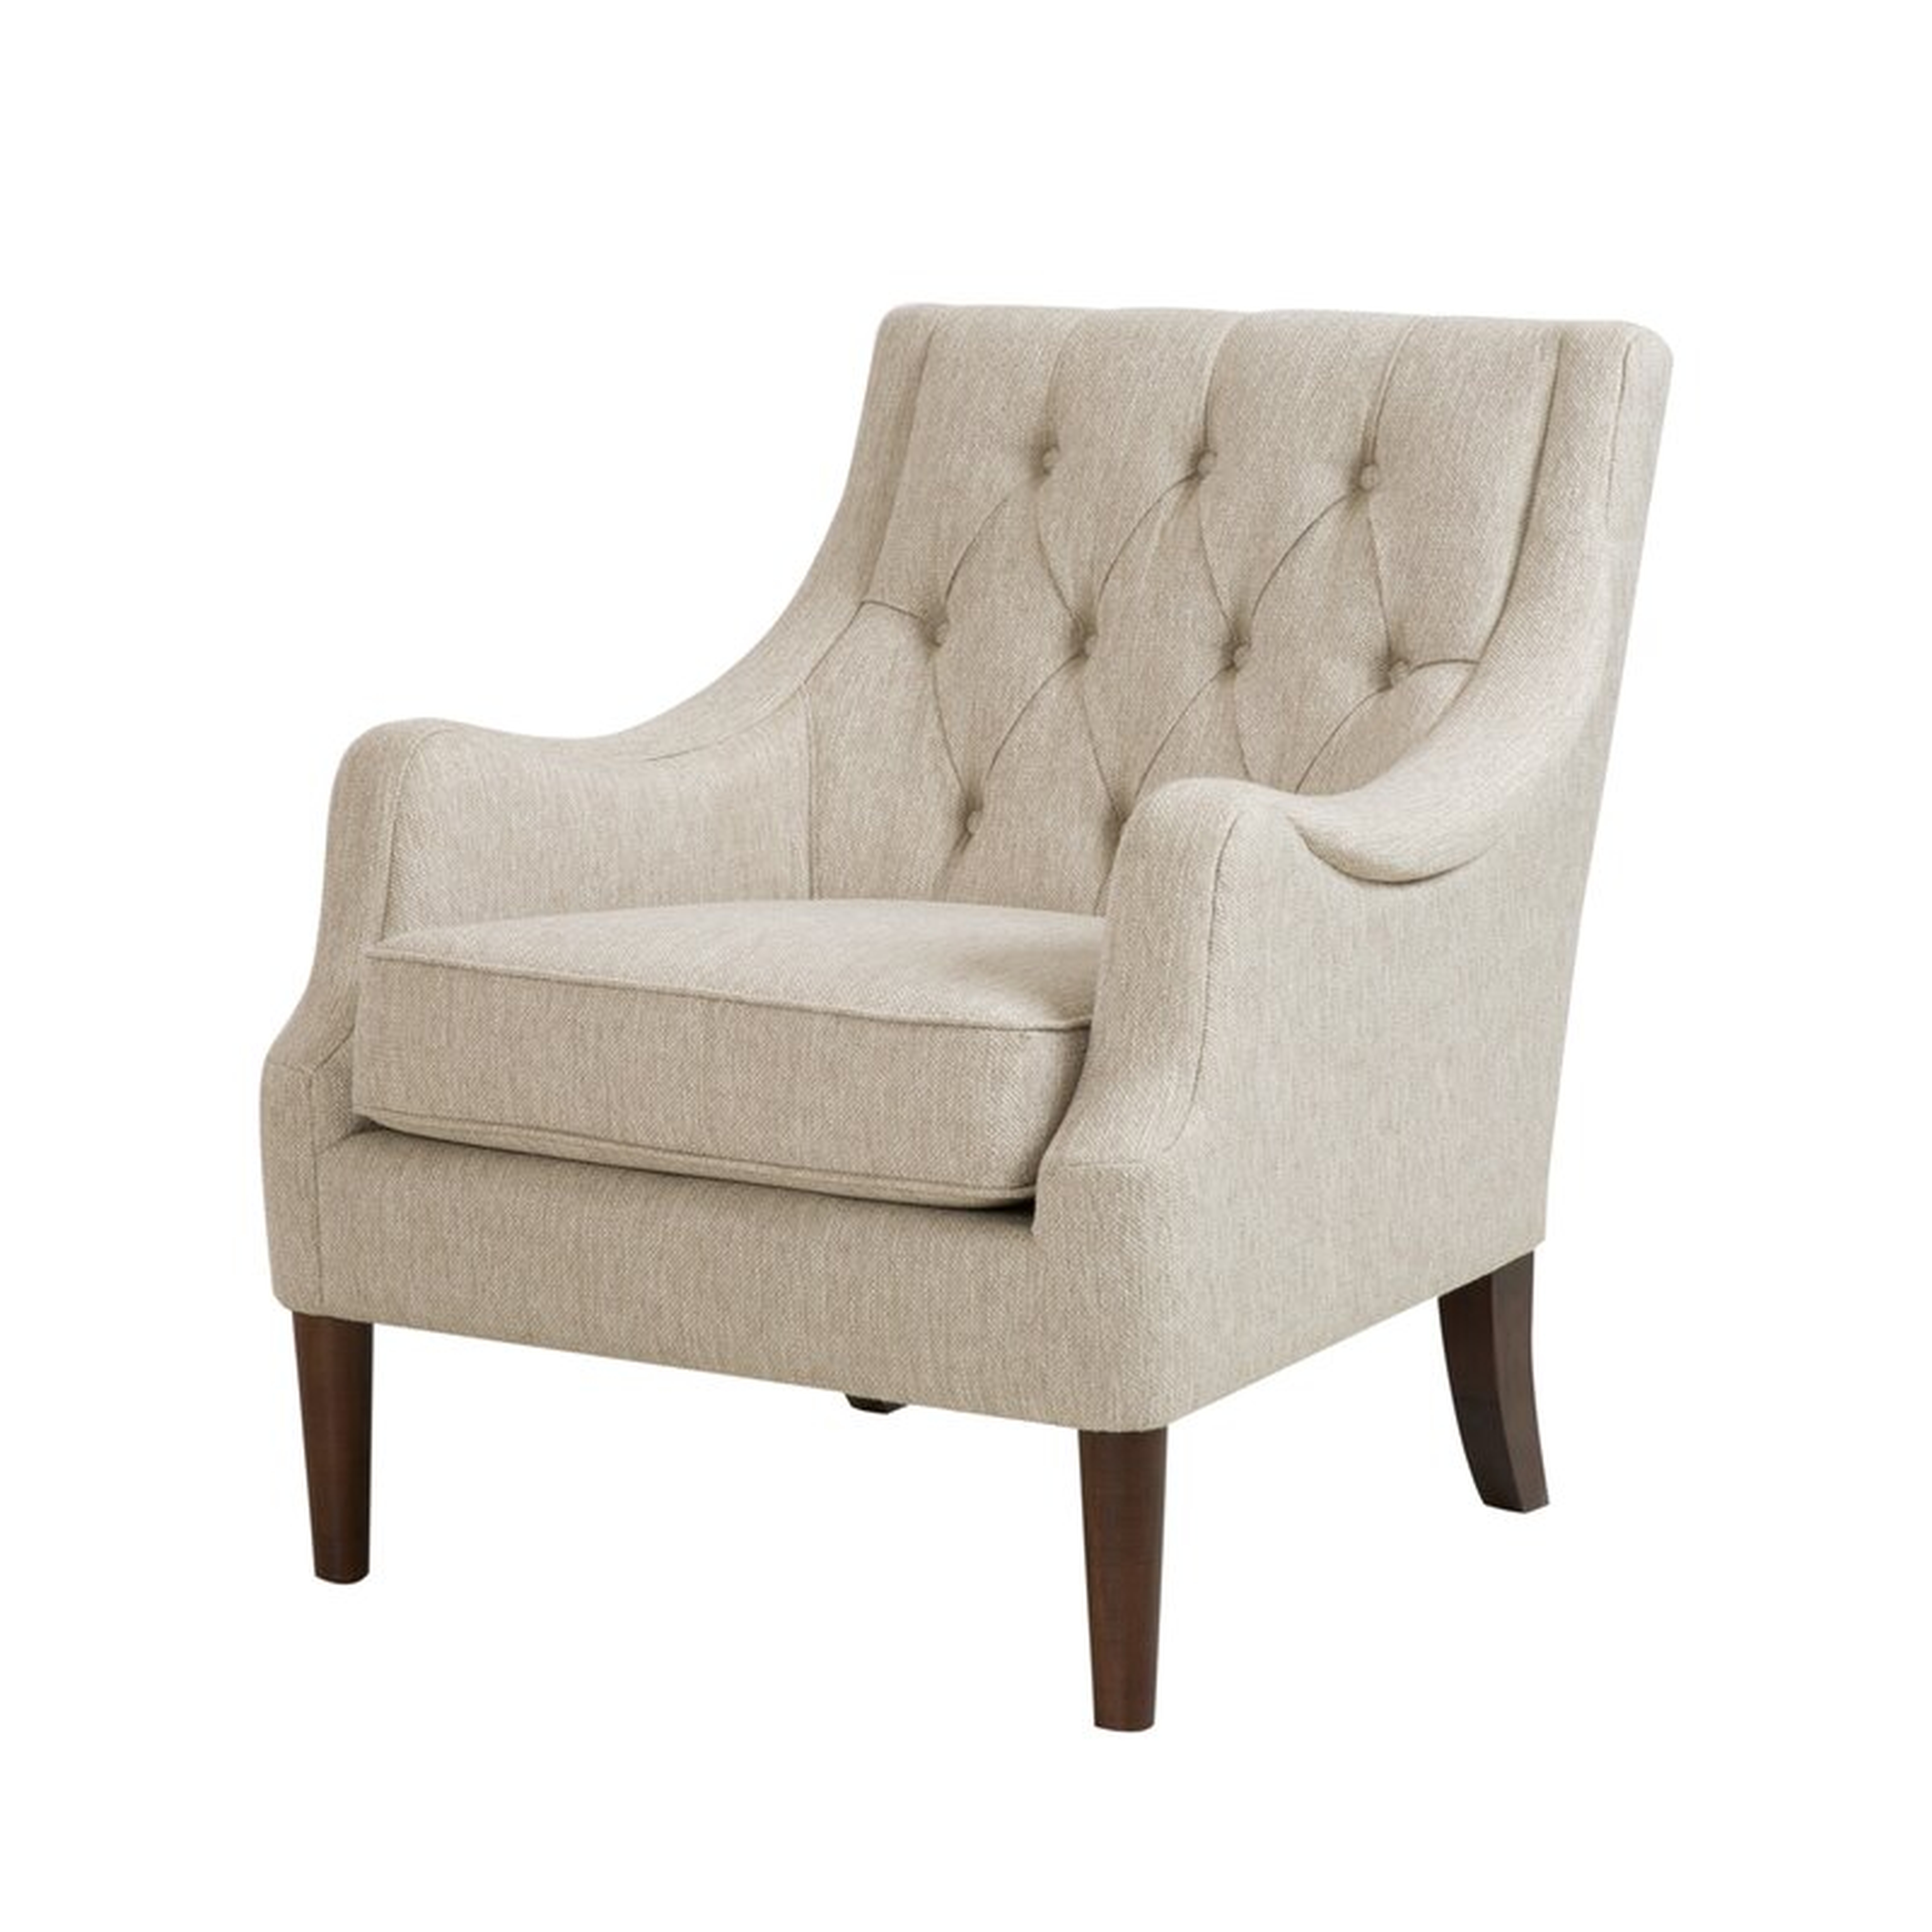 Galesville 29.25" Wide Tufted Polyester Wingback Chair - Birch Lane